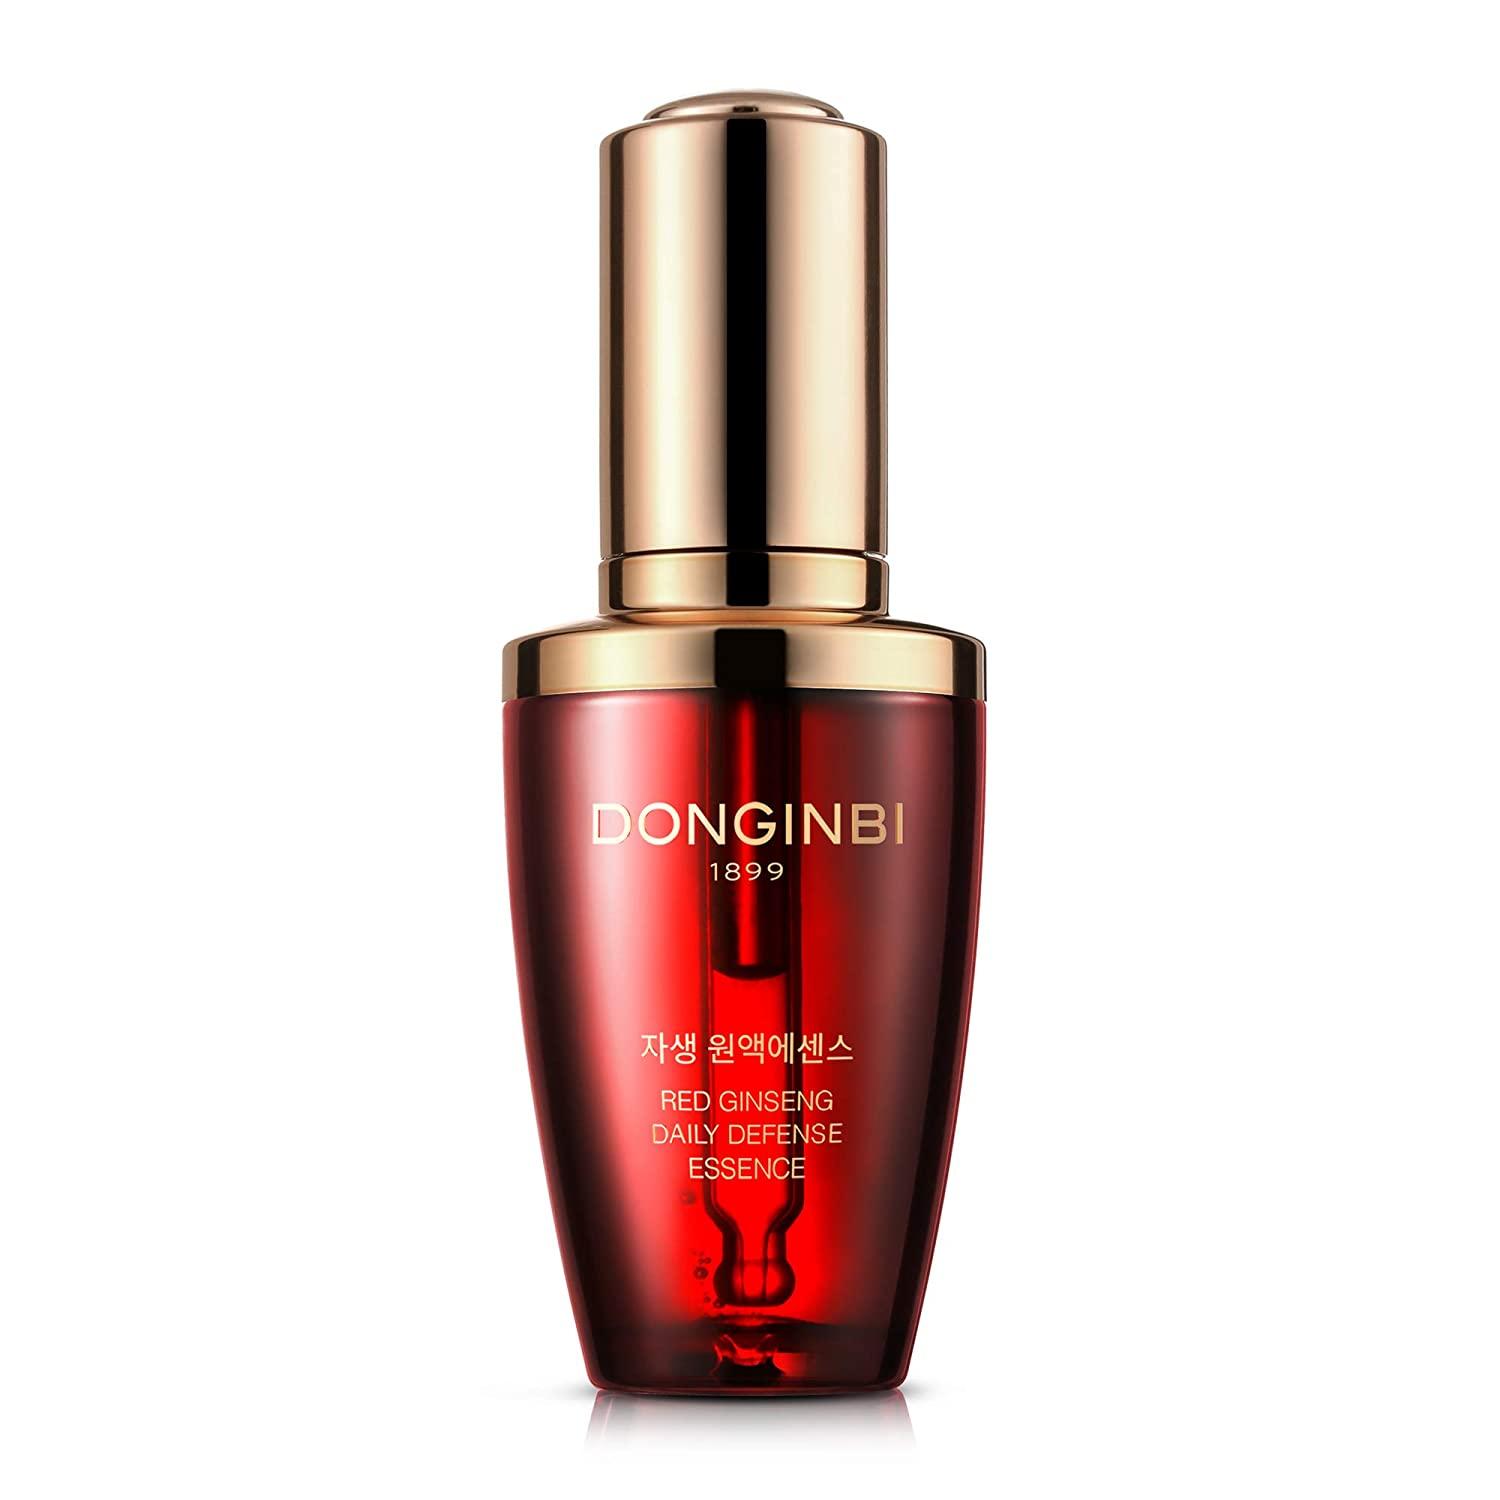 Red Ginseng Daily Defense Essence